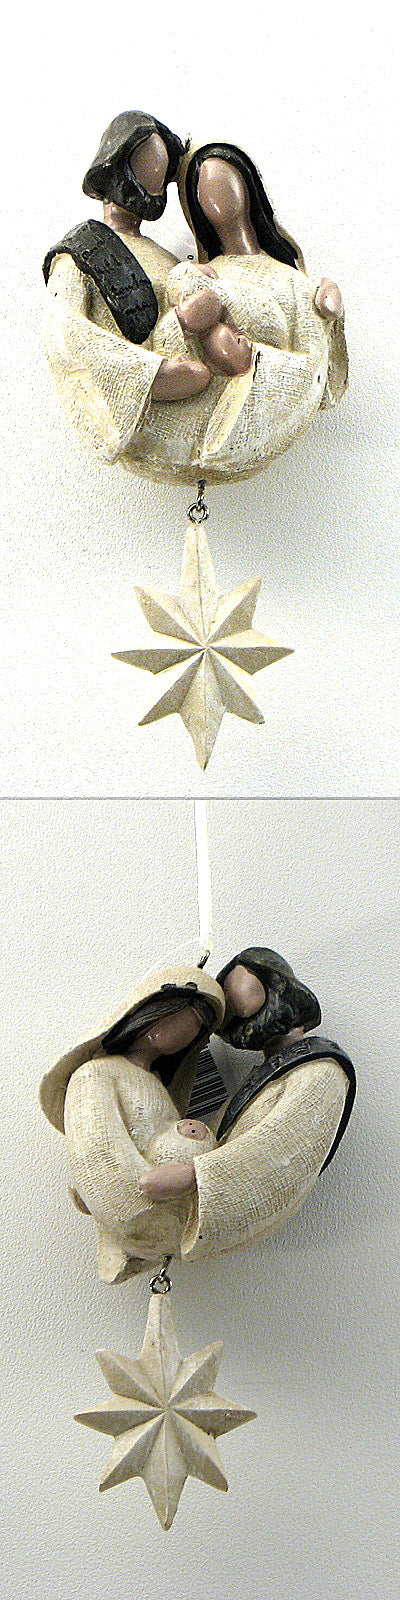 Nativity Ornament 2 Assorted Priced Each